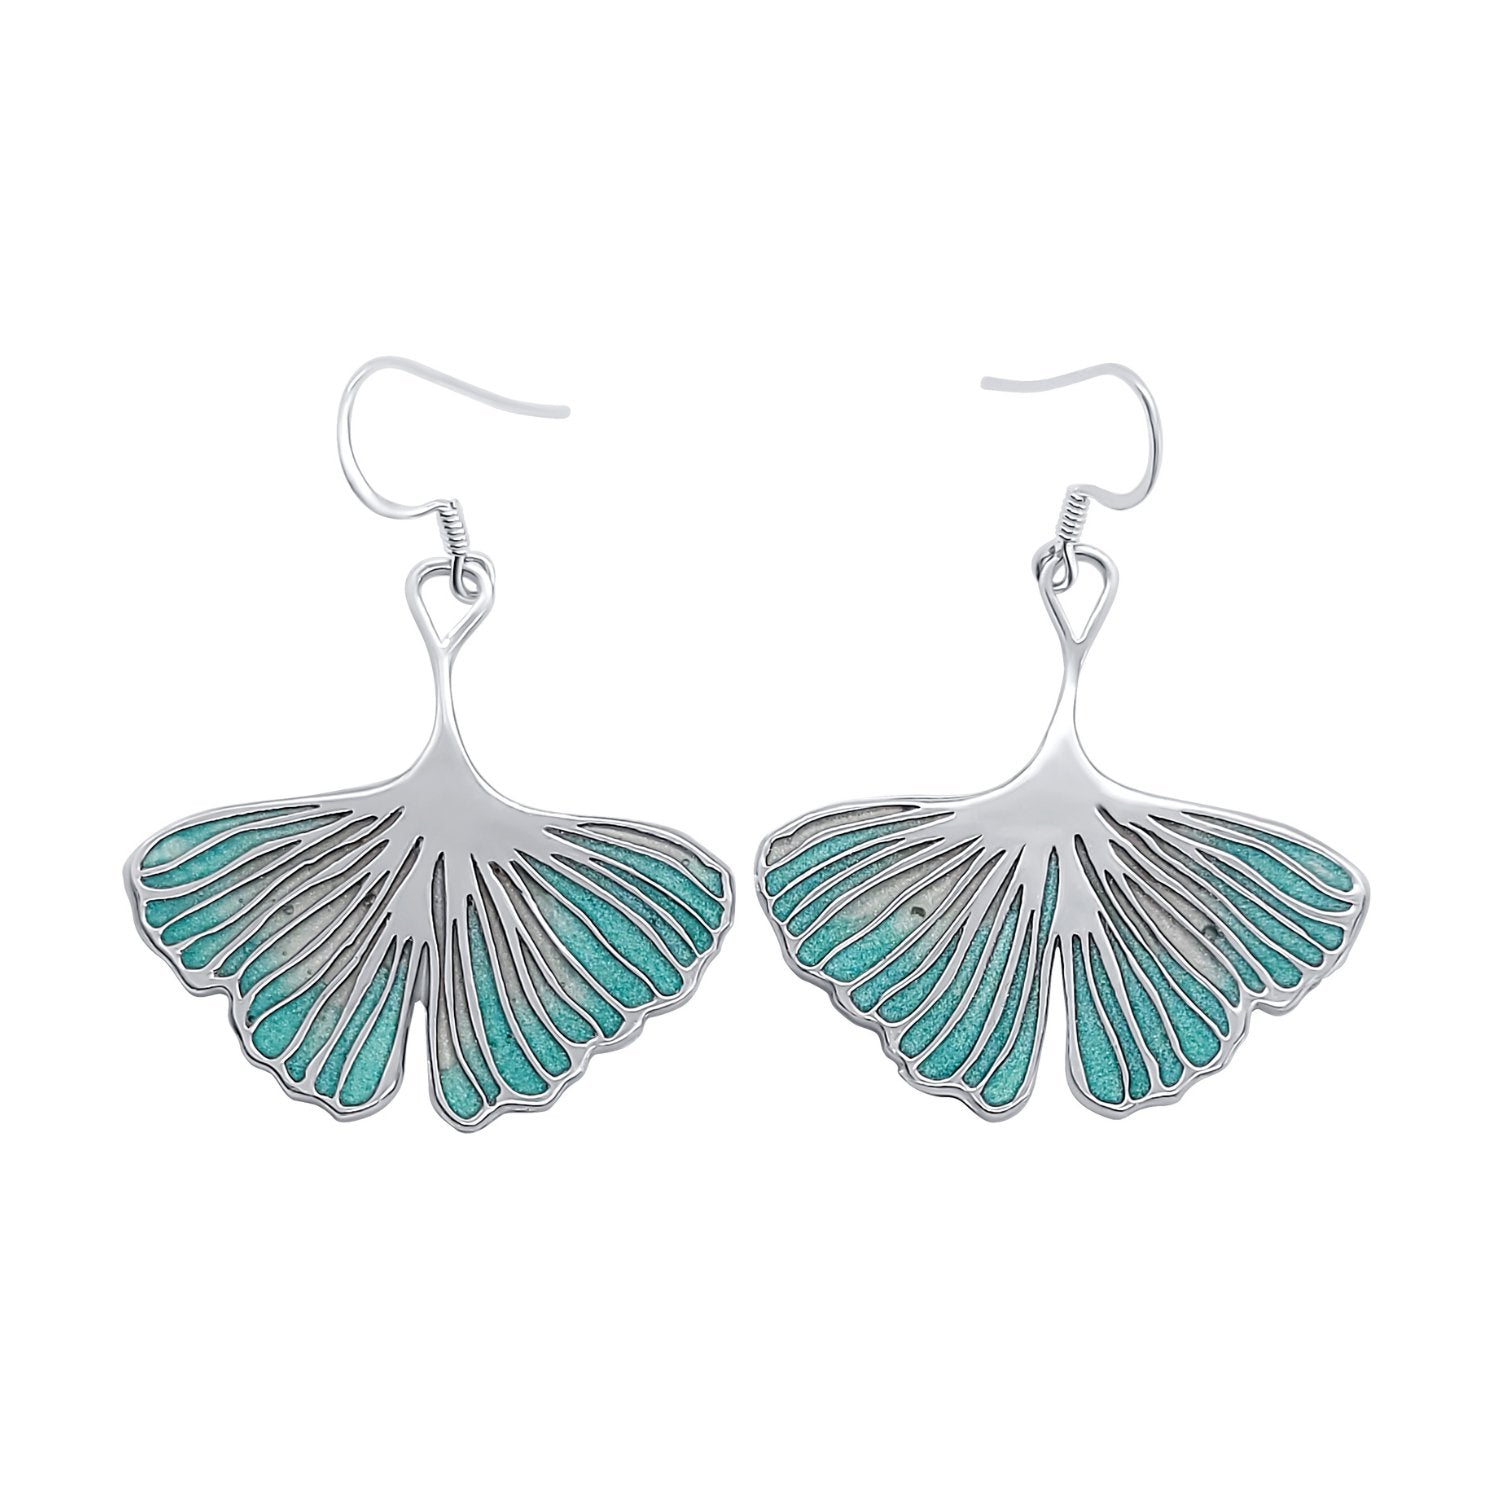 Adia Ginkgo Leaf Silver earrings with Turquoise Ombre fade TOP VIEW 